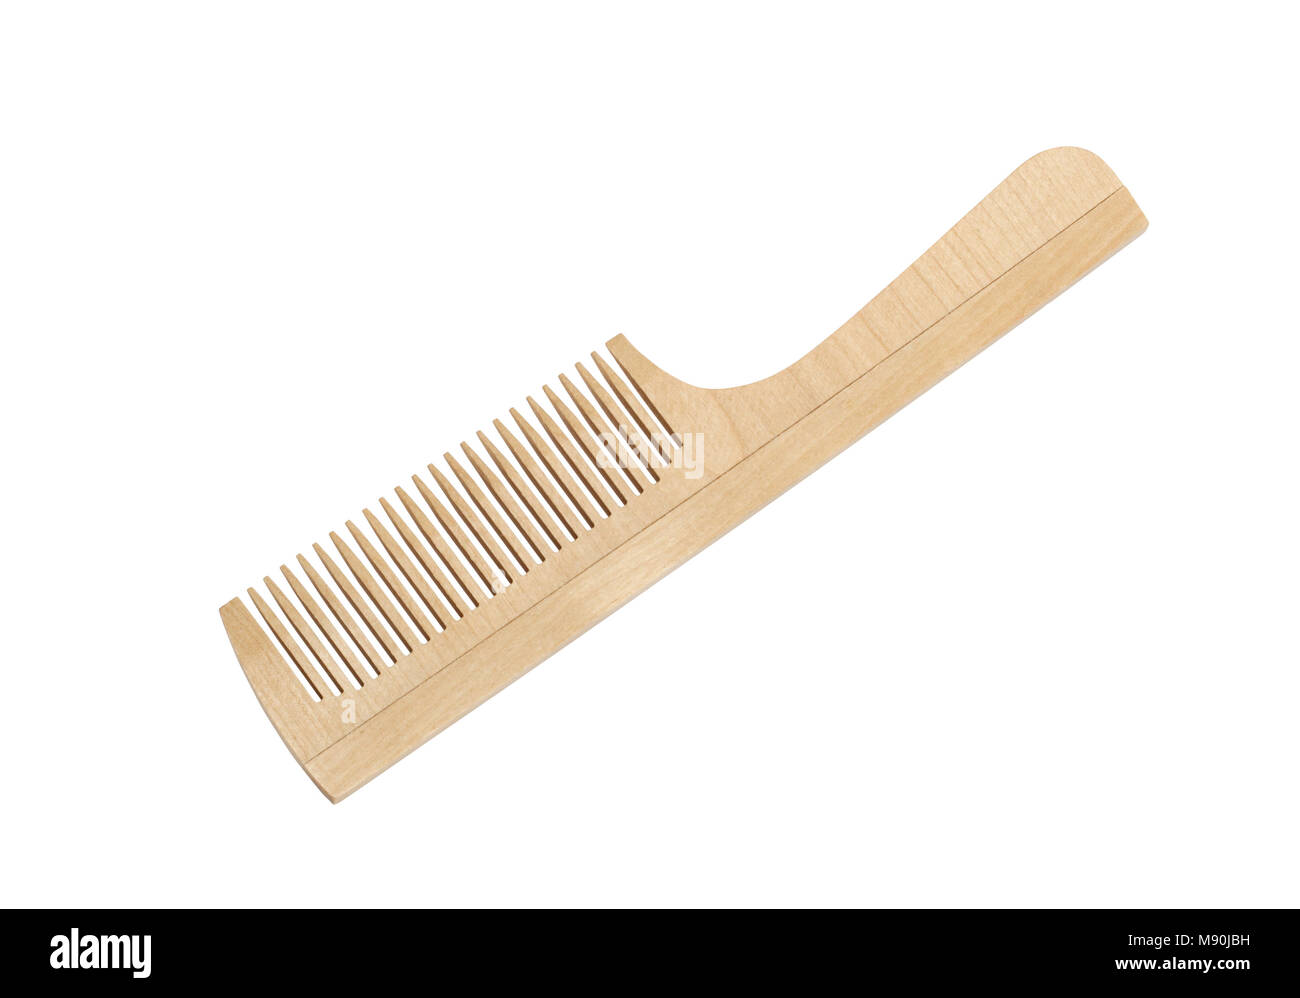 Wooden comb isolated on white background with clipping path Stock Photo